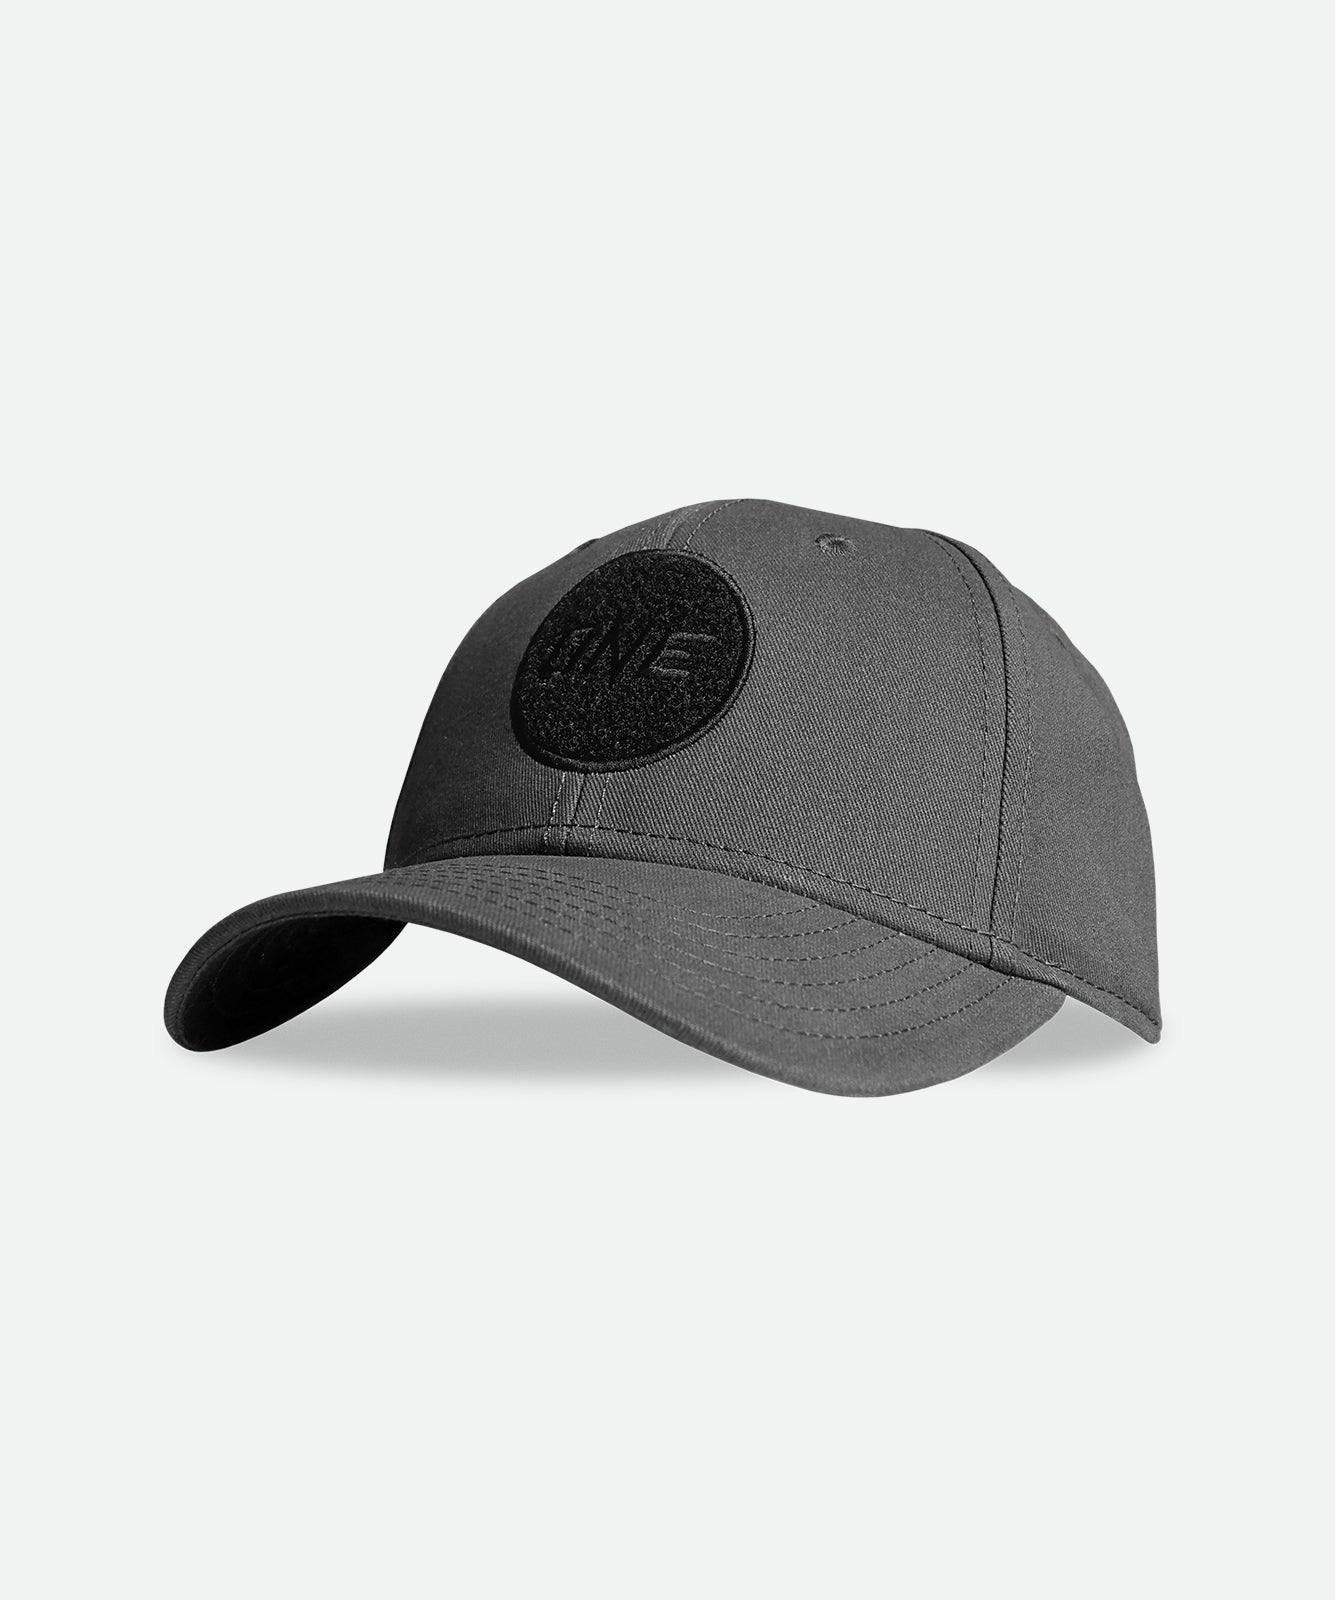 ONE Hero Cap (Gray) - ONE.SHOP | The Official Online Shop of ONE Championship